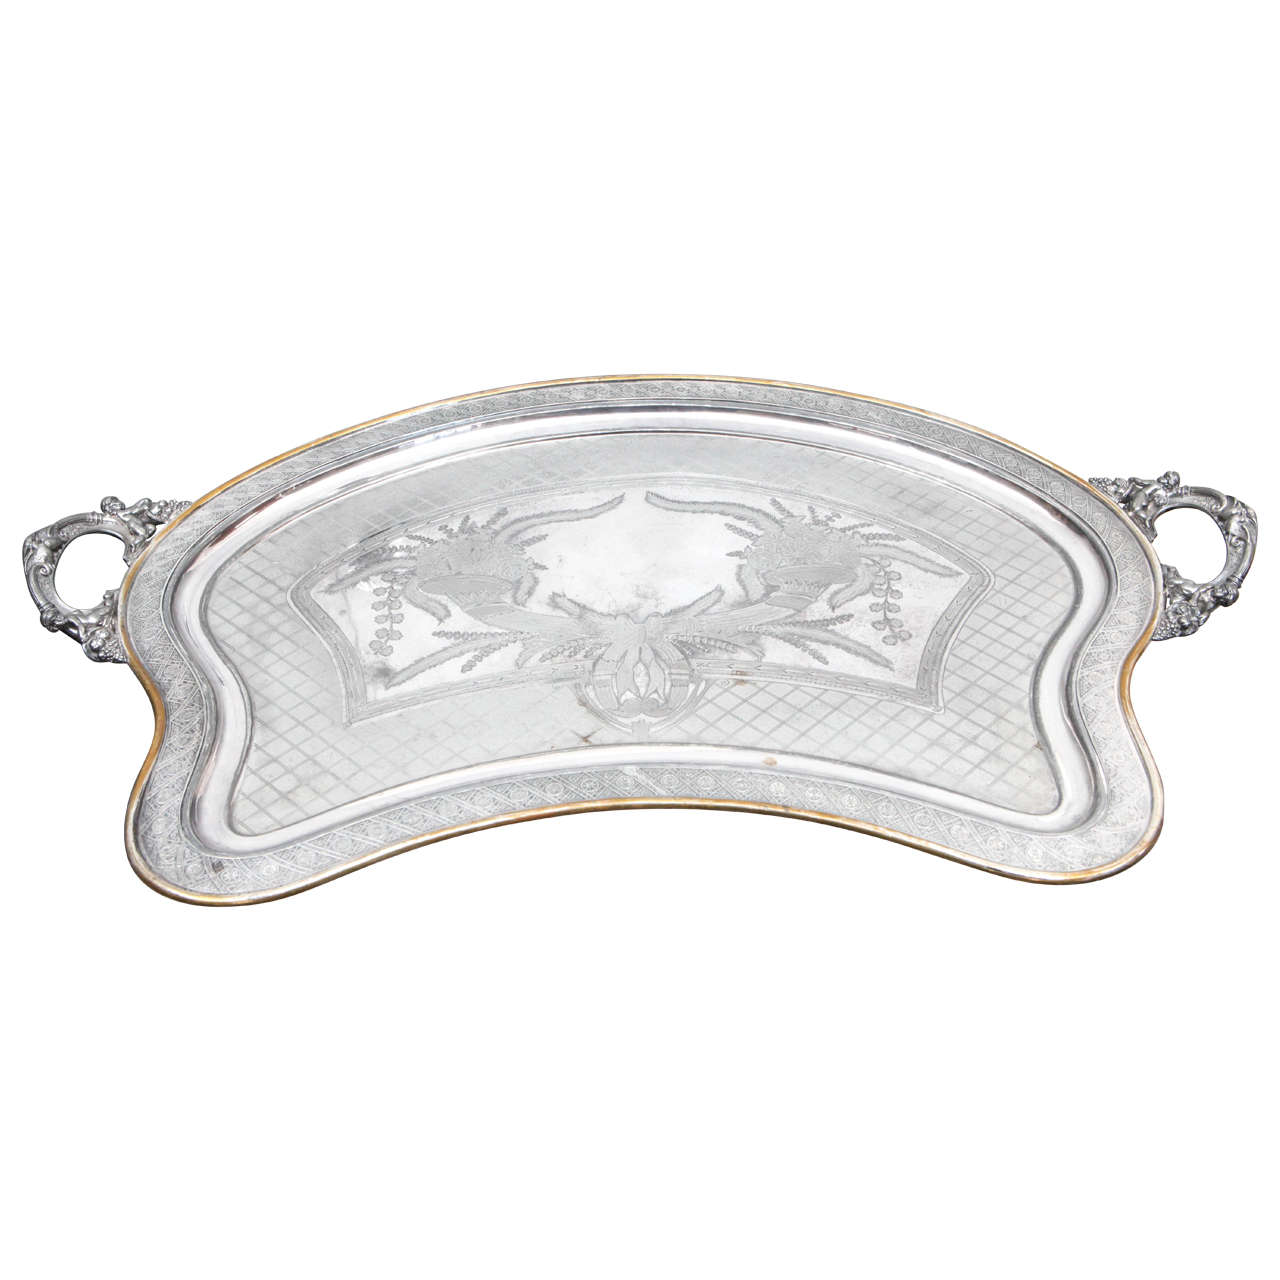 Silver Plated Butler Tray with Articulated Cherub Handles For Sale